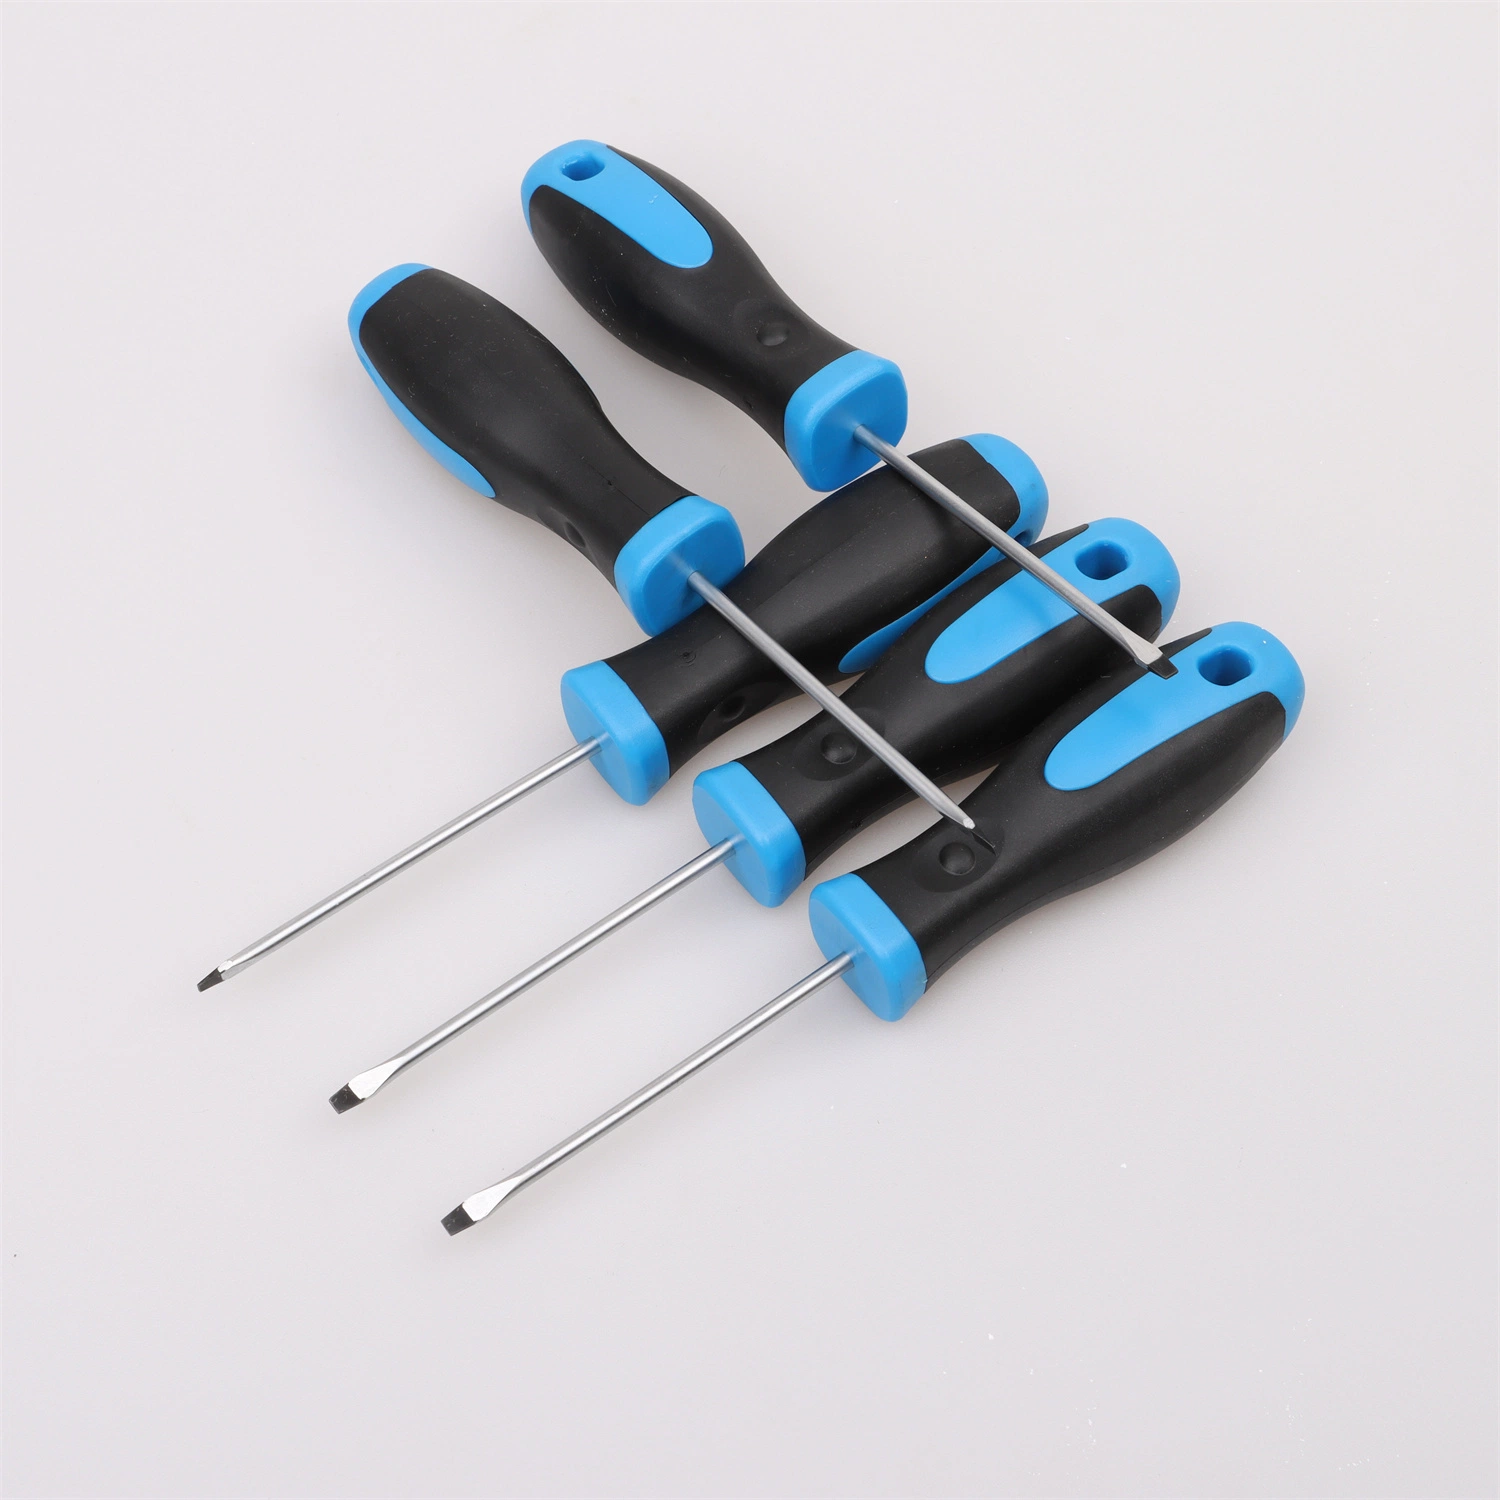 Portable Screwdriver Tool Accessories Hardware Tool for Home